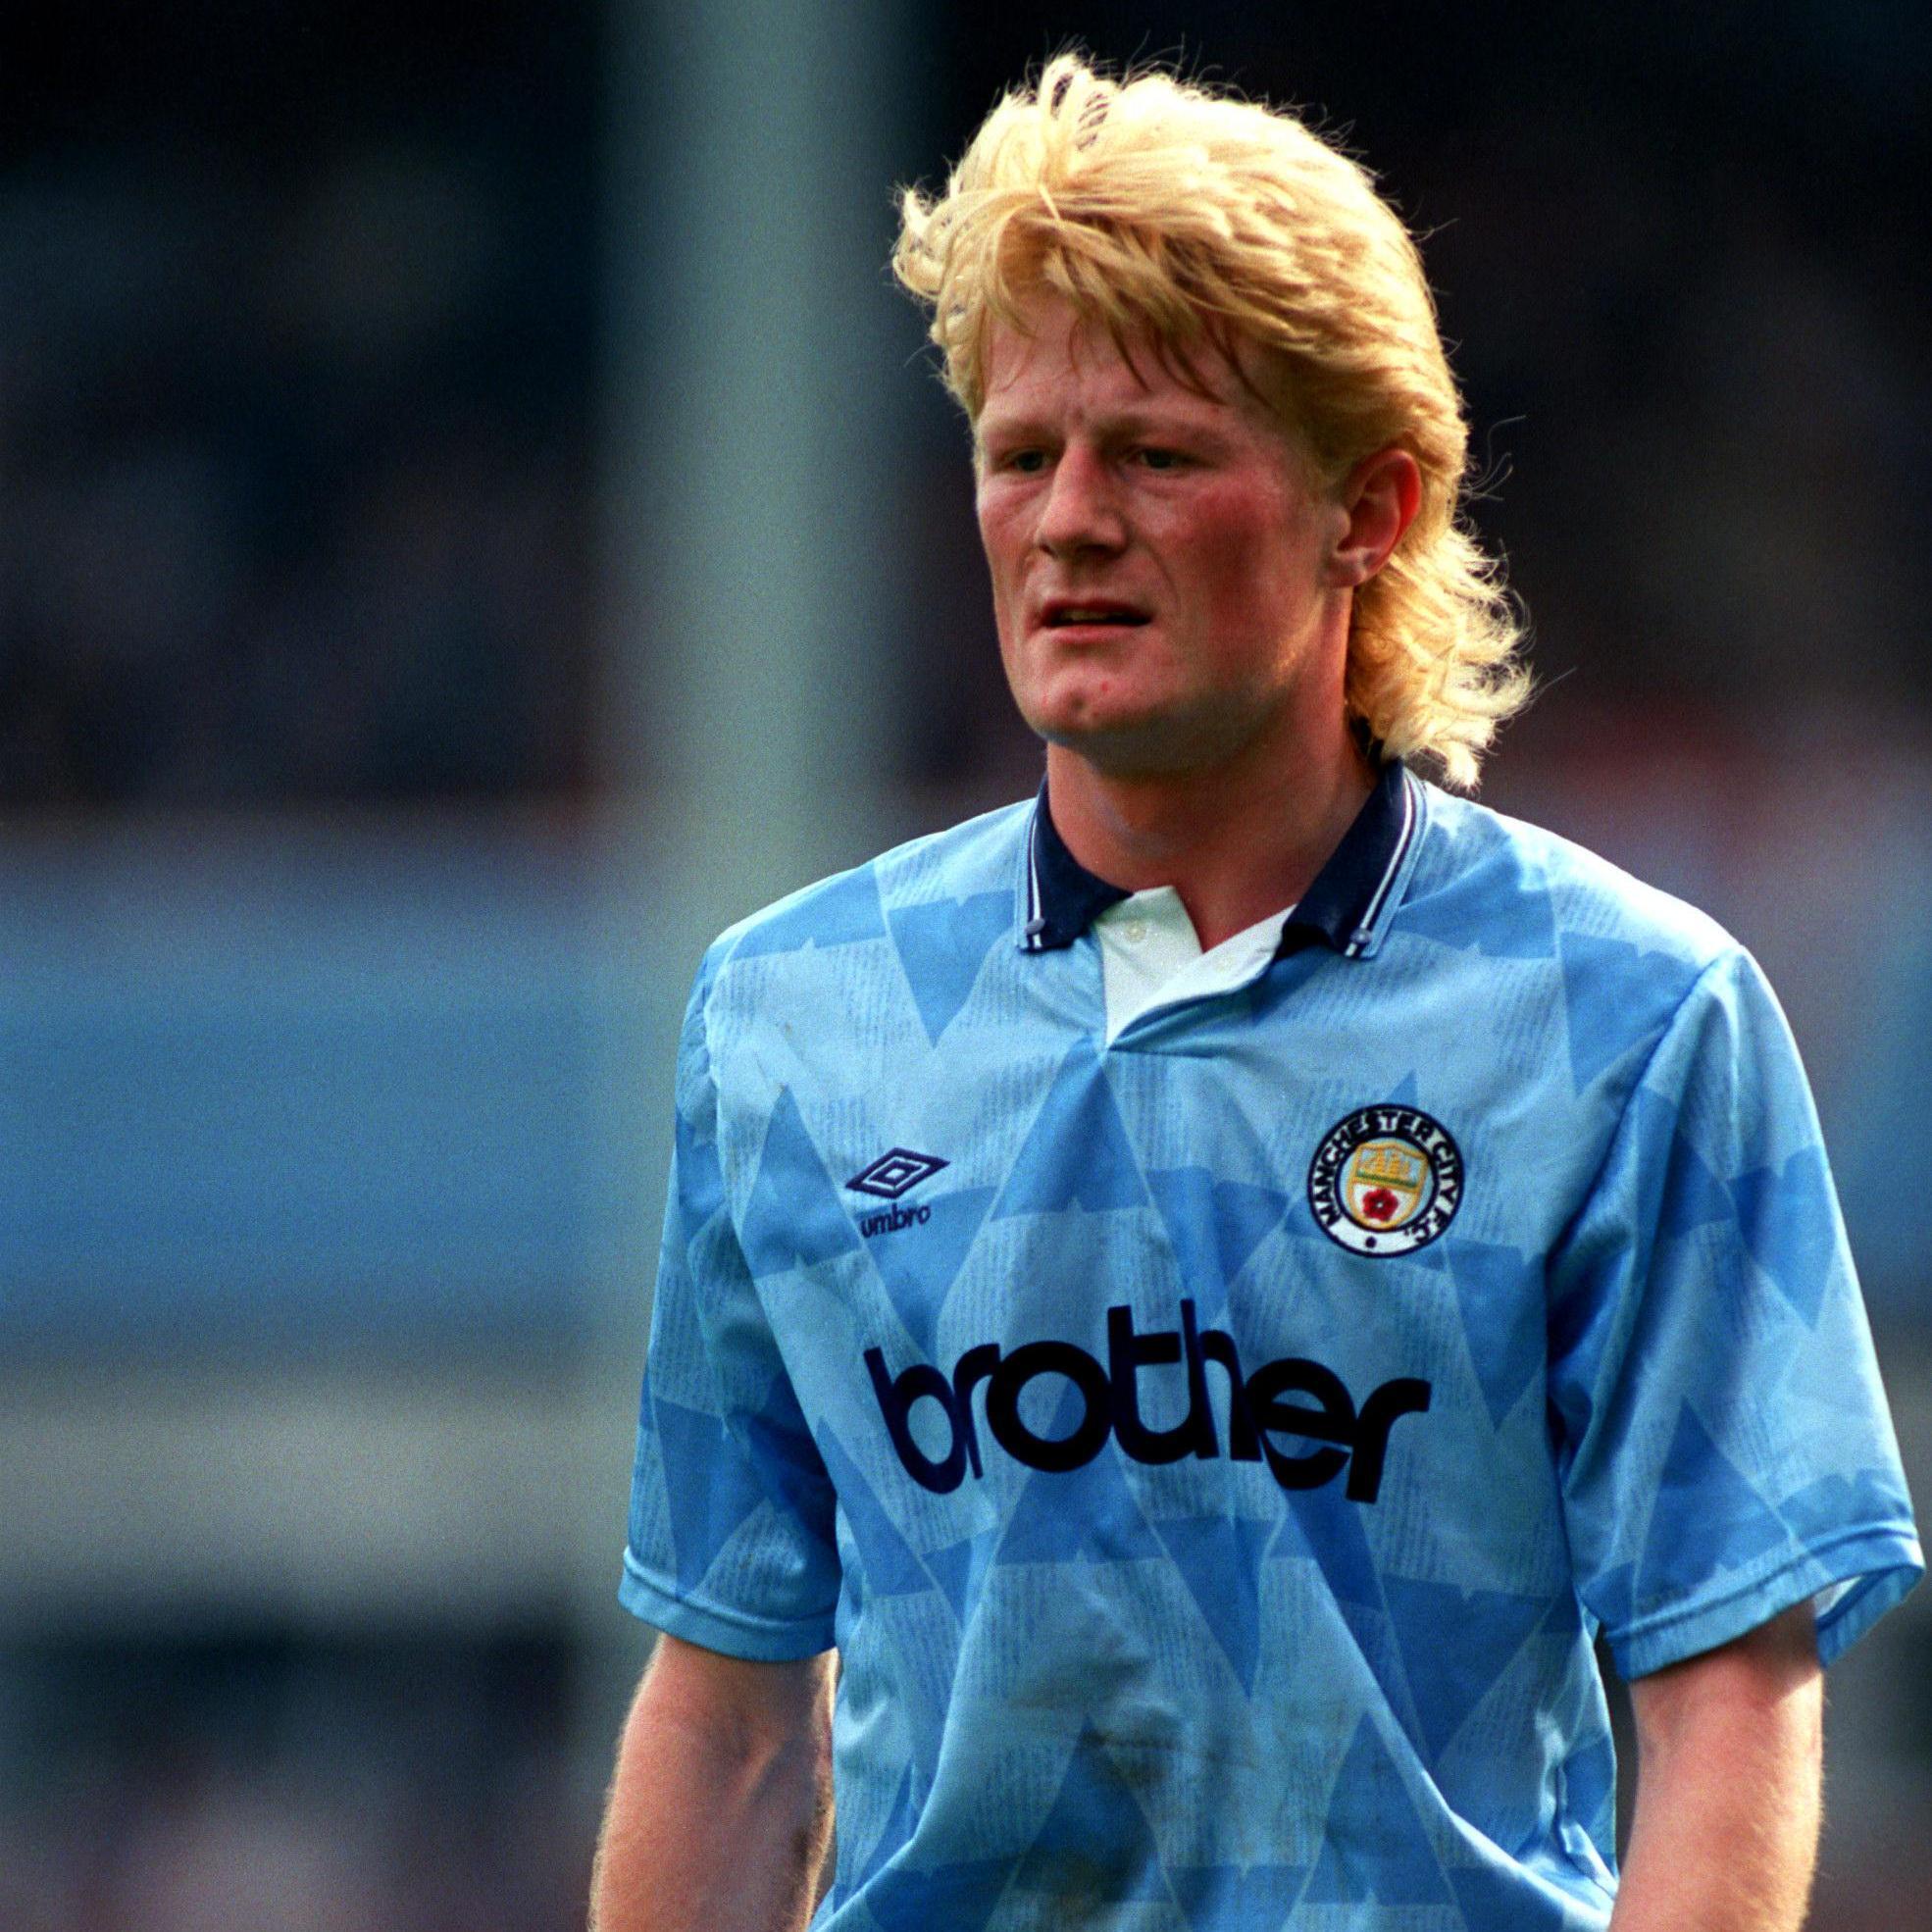 Manchester City on X: "MYSTERY BLUE: It was Colin Hendry! Well done if you got it. We'll have another one for you very soon. #mcfc http://t.co/zw5sa4ndVL" / X